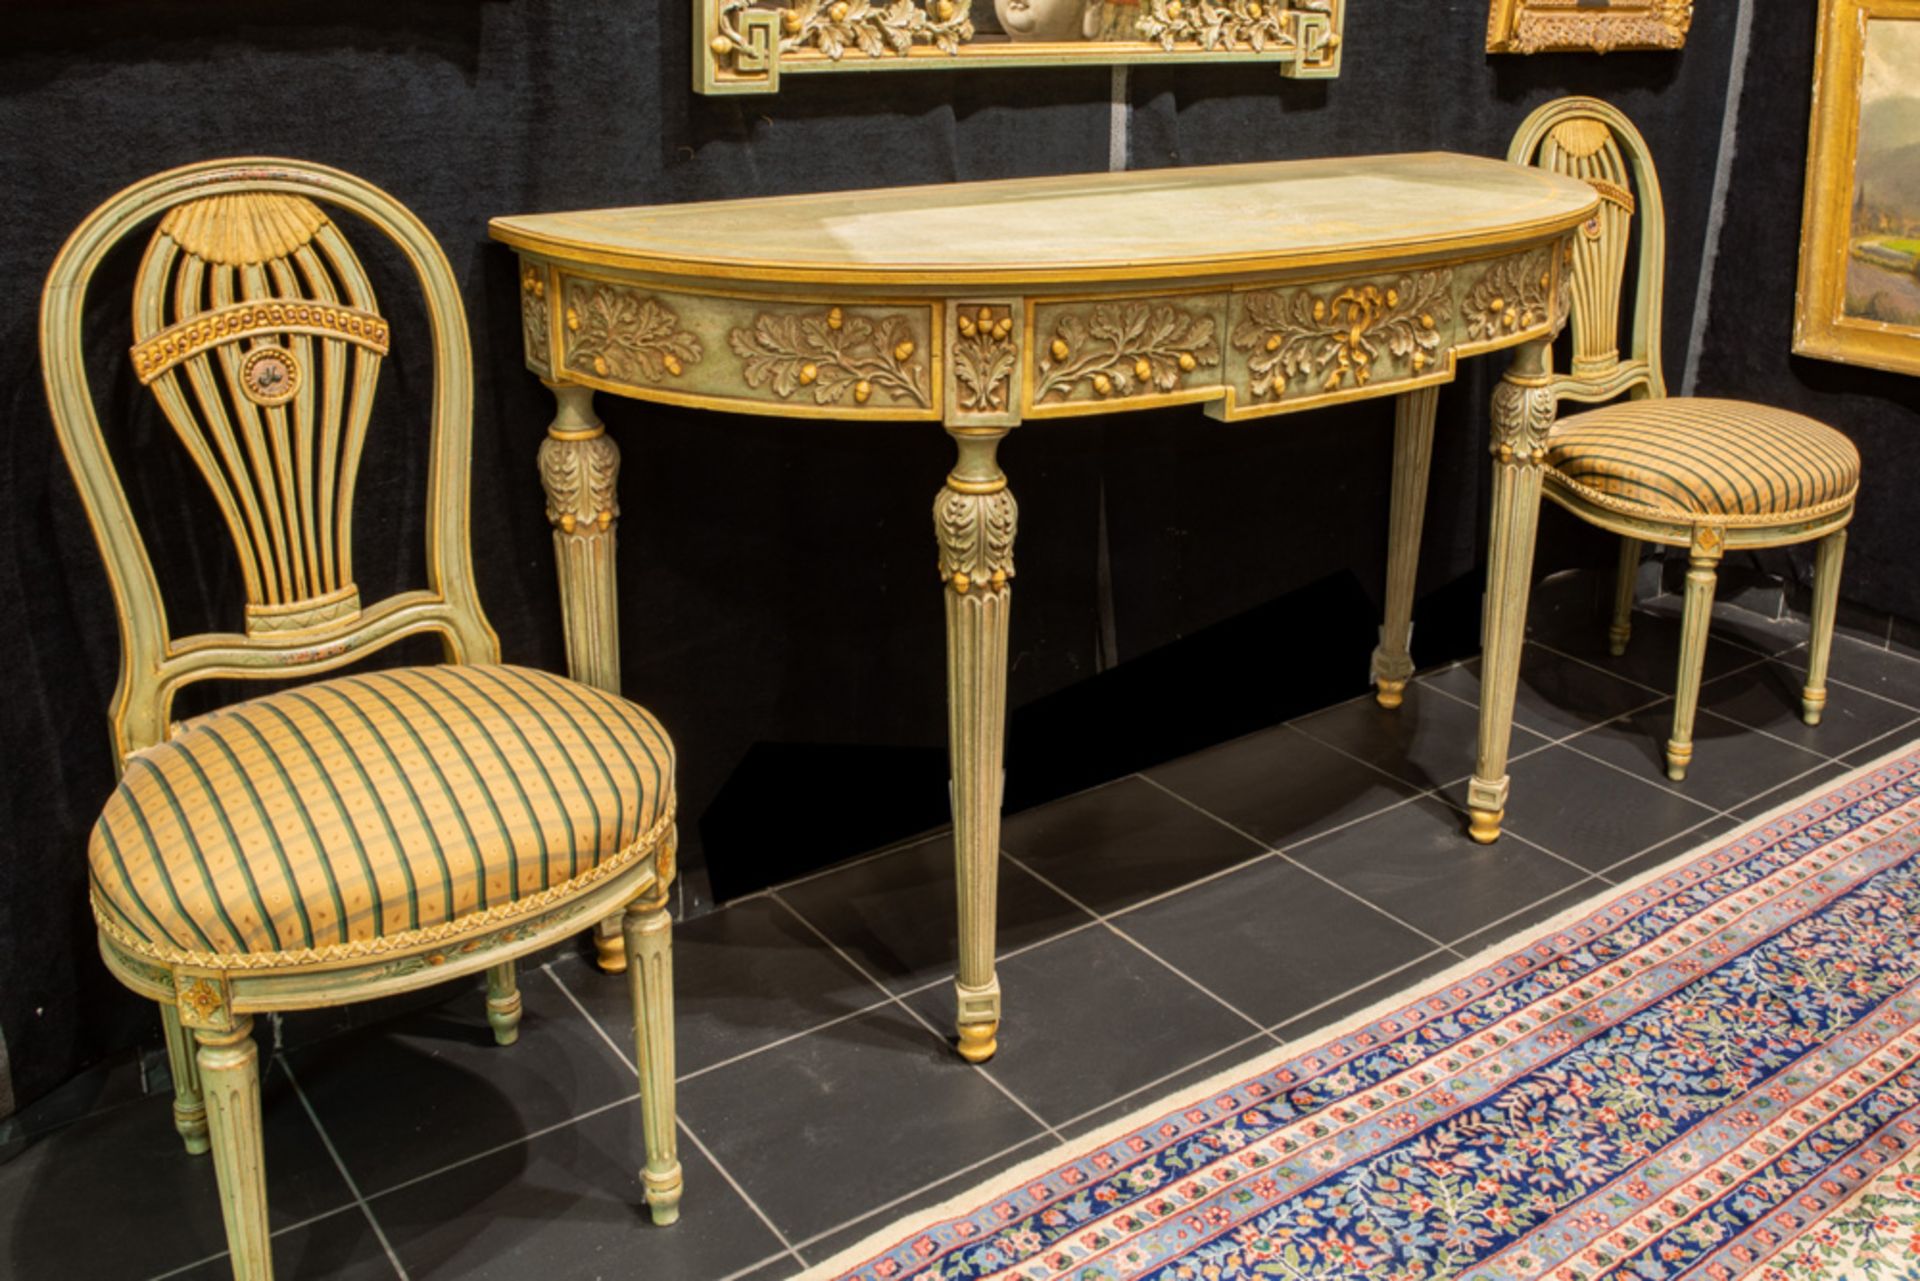 neoclassical set in polychromed wood : a console, mirror and a pair of chairs || Neoclassicistisch - Bild 3 aus 5